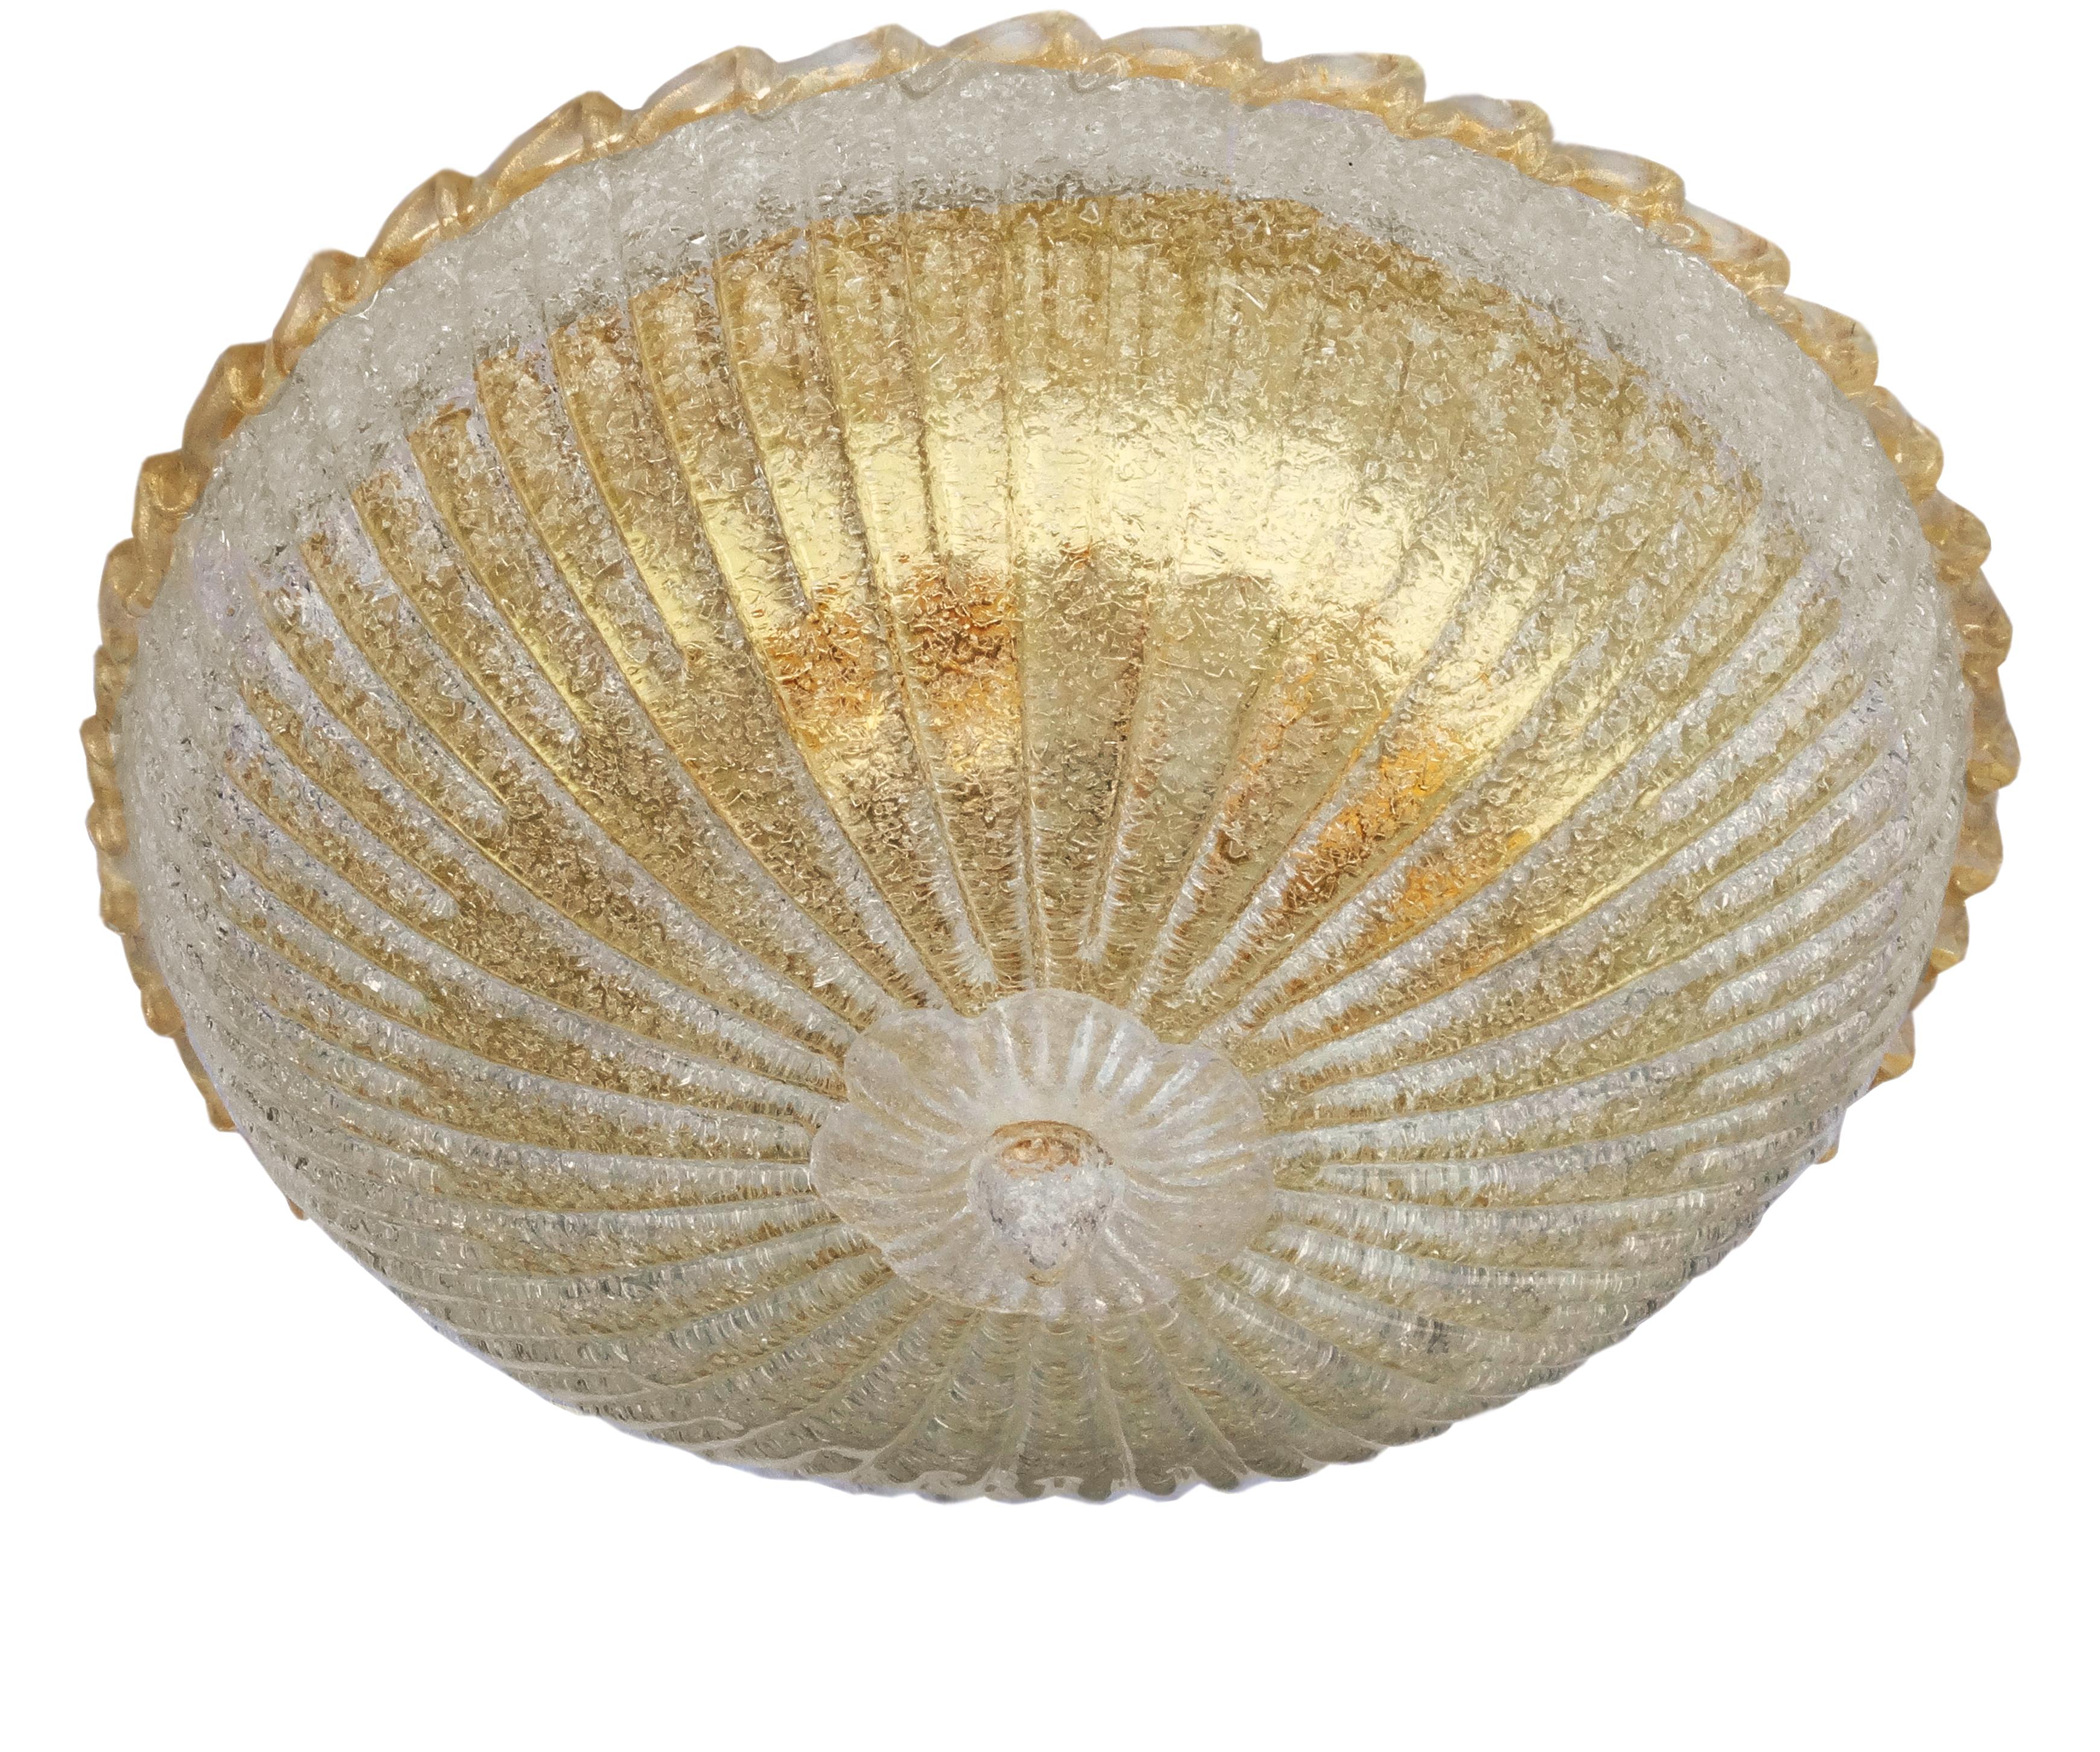 Italian flush mount with a Murano glass diffuser hand blown in Graniglia technique to produce granular textured effect with gold flecks, mounted on gold-plated finish frame / Made in Italy
Measures: diameter 20 inches, height 9 inches
3 lights / E26